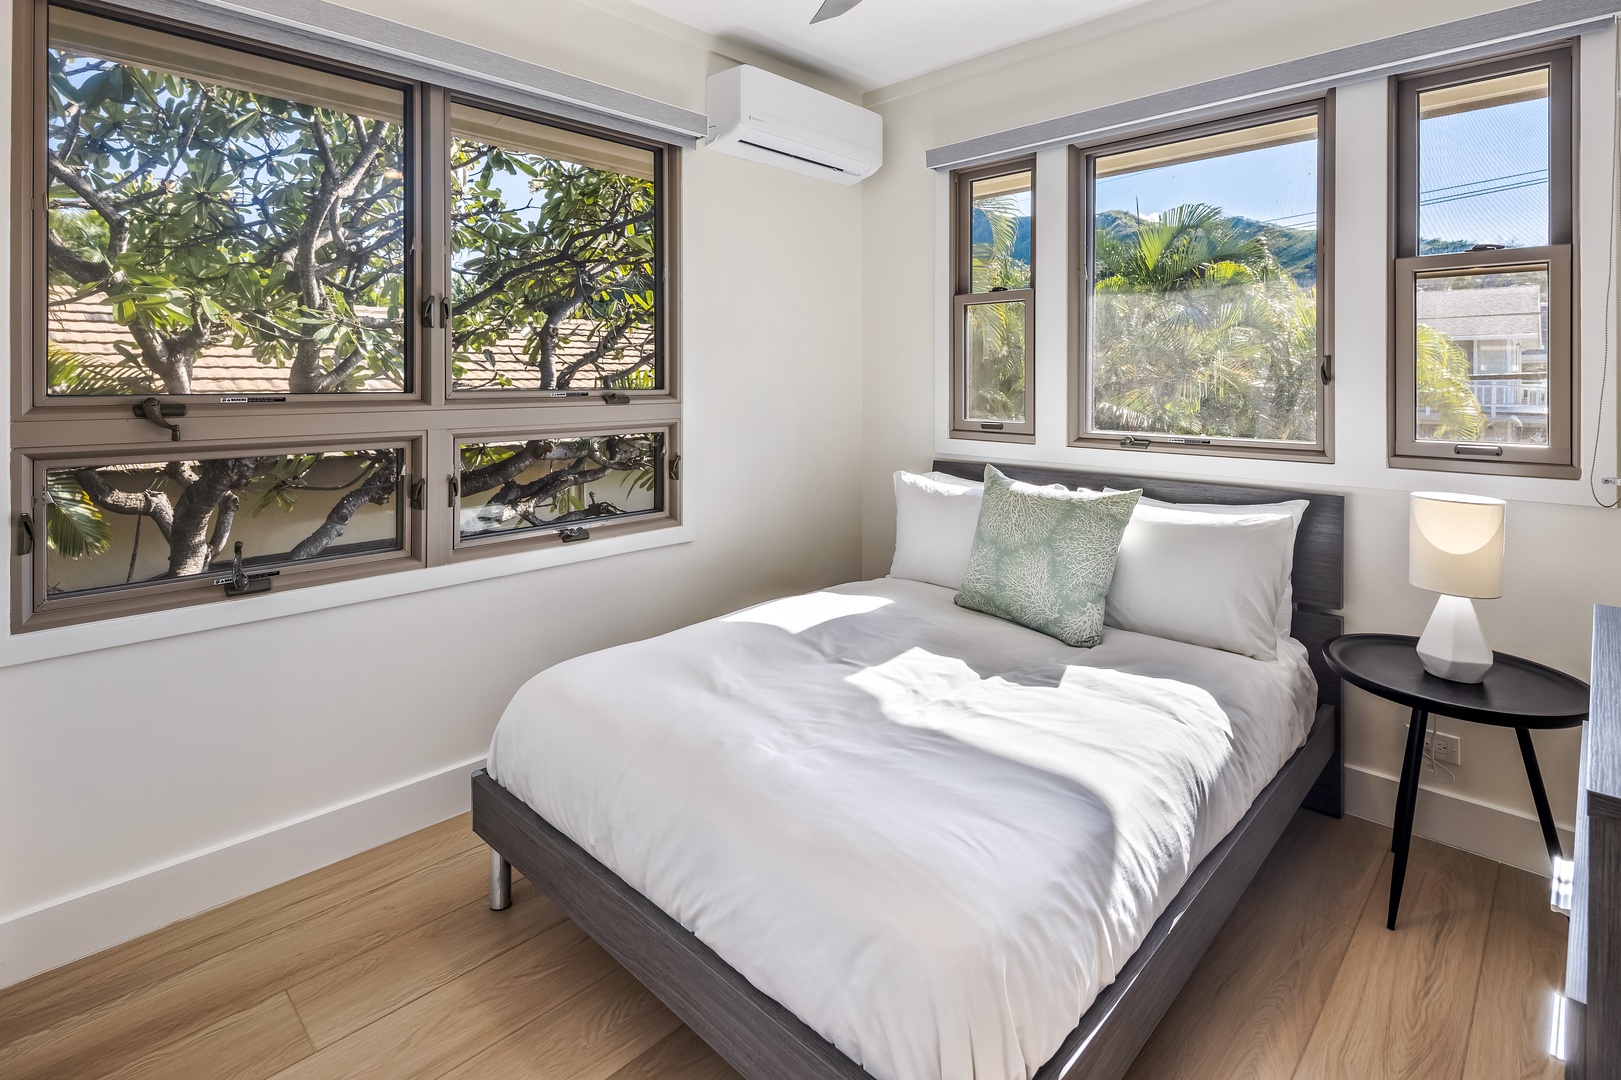 Kailua Vacation Rentals, Na Makana Villa - Guest Bedroom 6 is furnished with a double bed and has mountain views